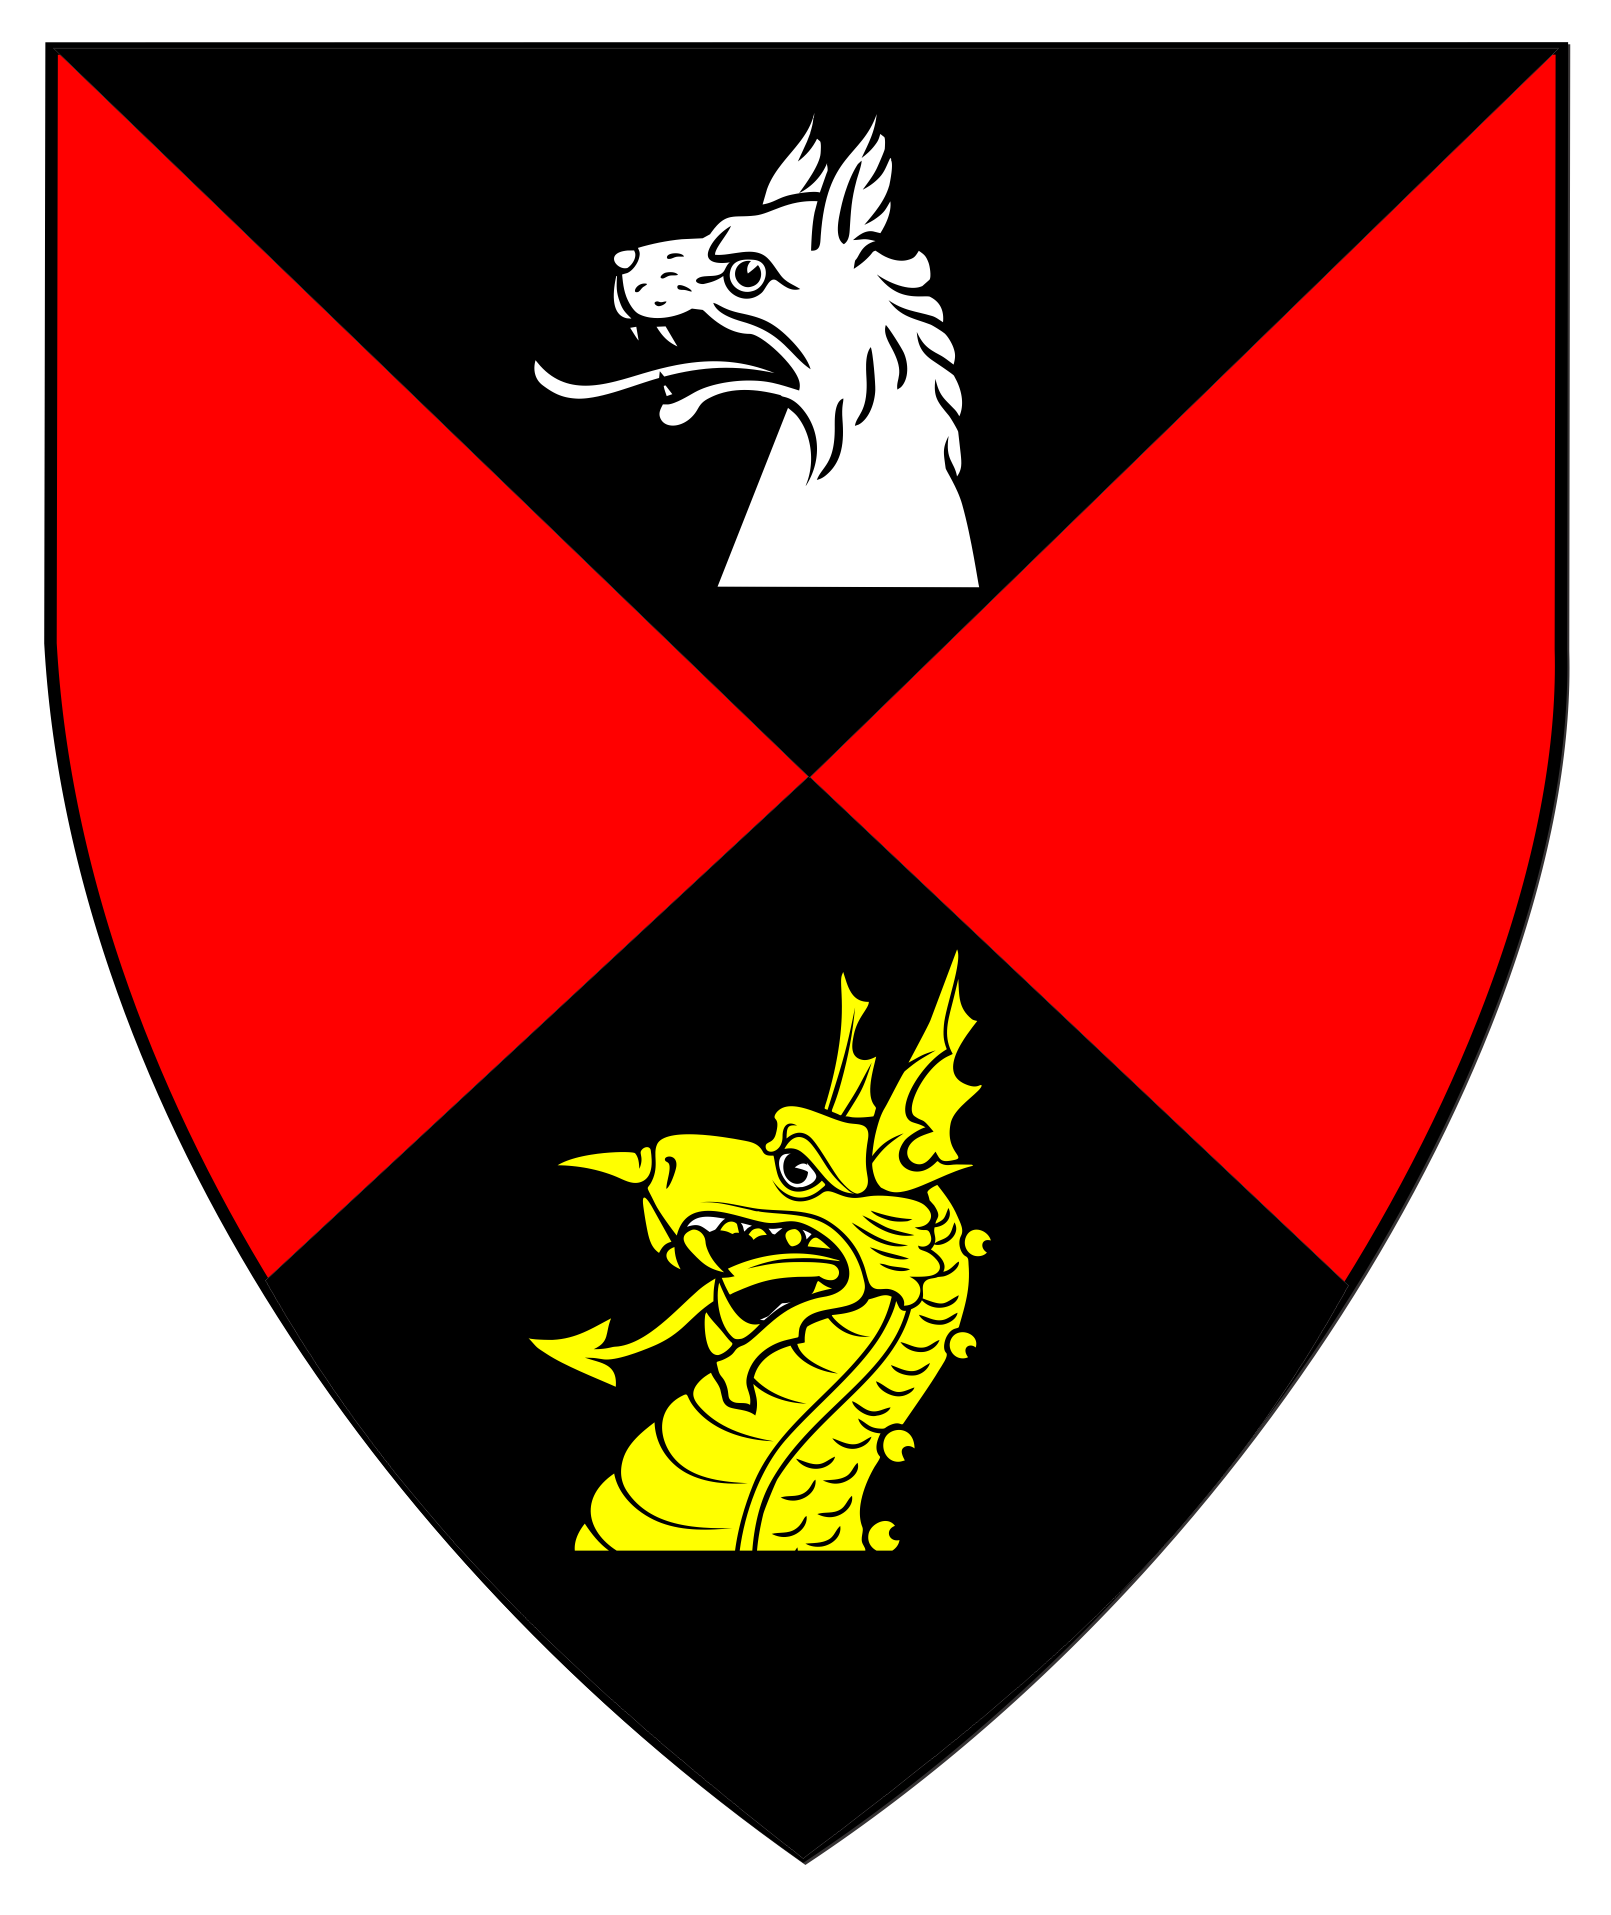 Per saltire sable and gules, in pale a wolf's head couped argent and a dragon's head couped Or.